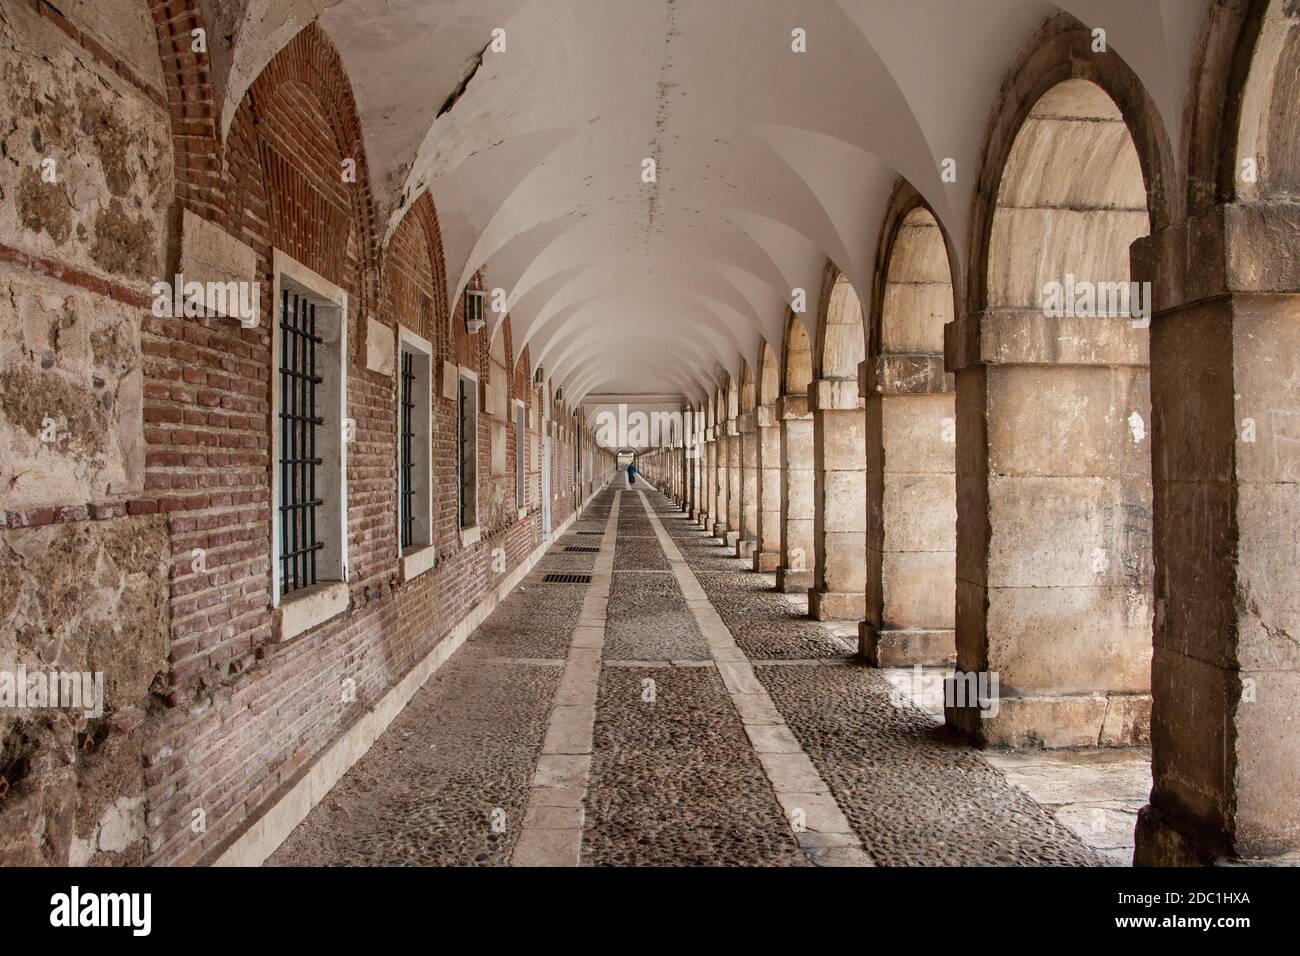 A Colonnade at the Royal Palace of Aranjuez, Spain Stock Photo